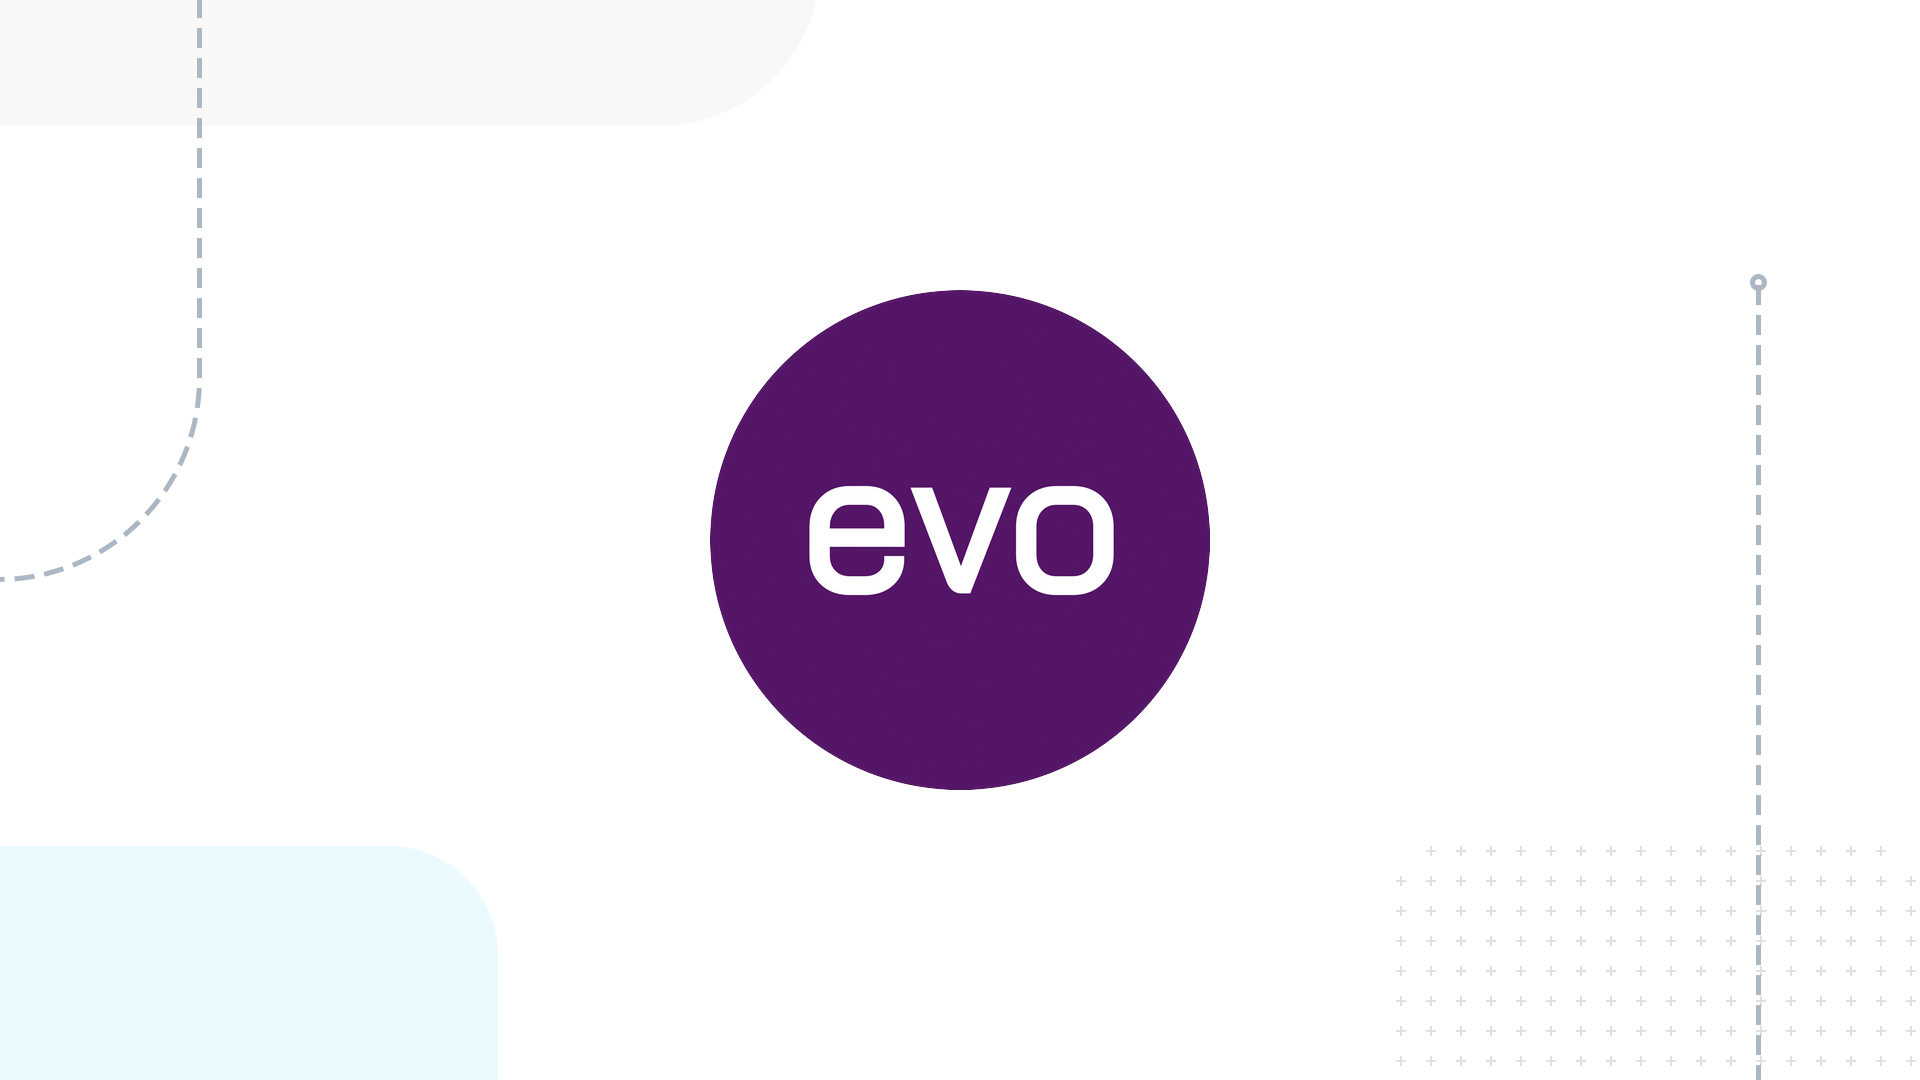 Sorenson Ventures: Why We Invested in Evo Security